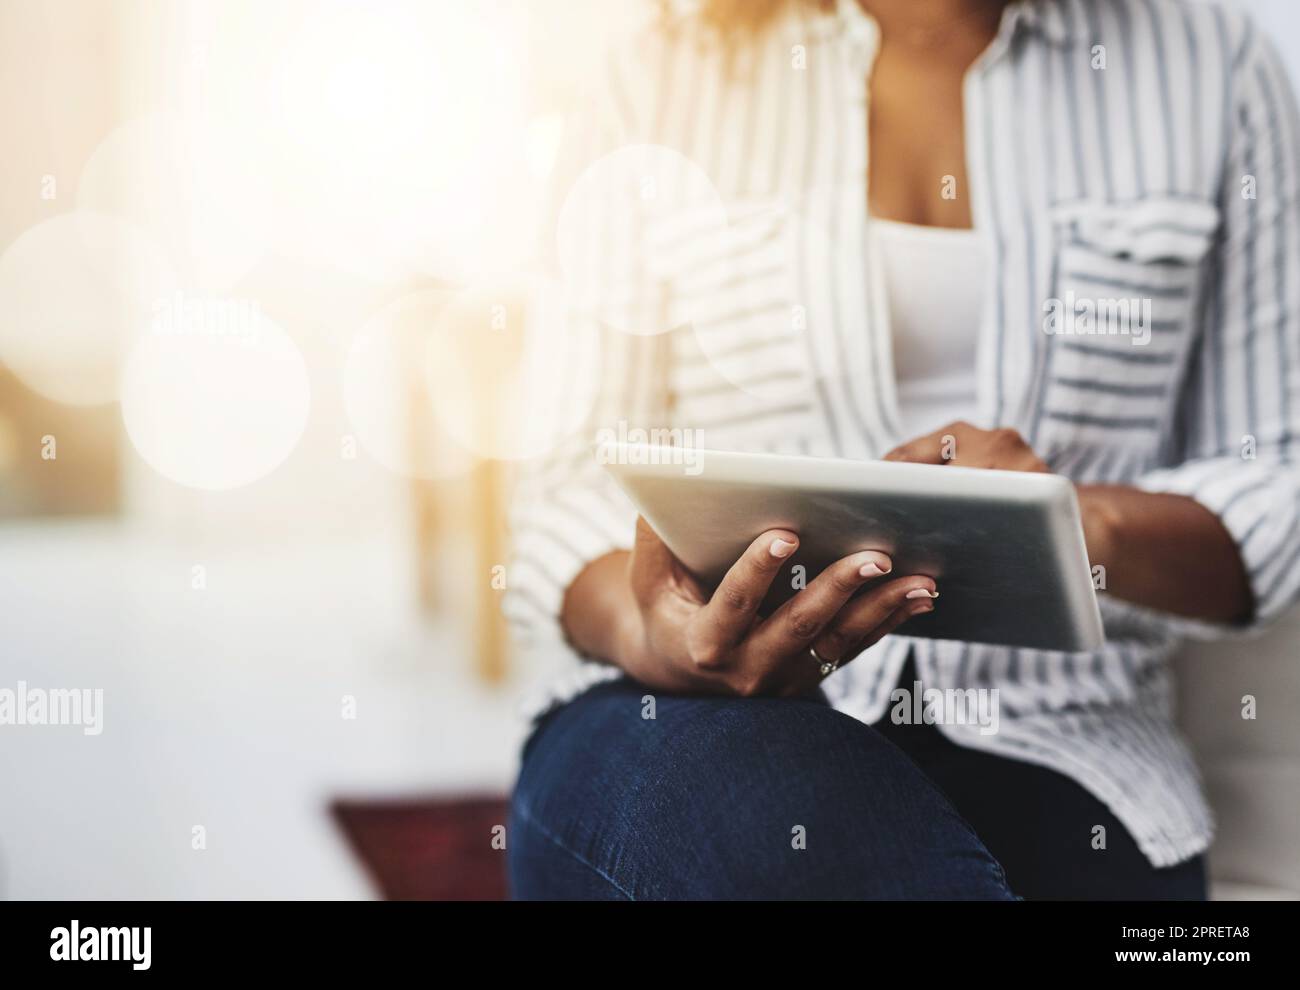 Tablet technology in the hands of a woman browsing social media, surfing the internet or chatting online with flare and copyspace. Closeup of a female sending an email message or reading news Stock Photo